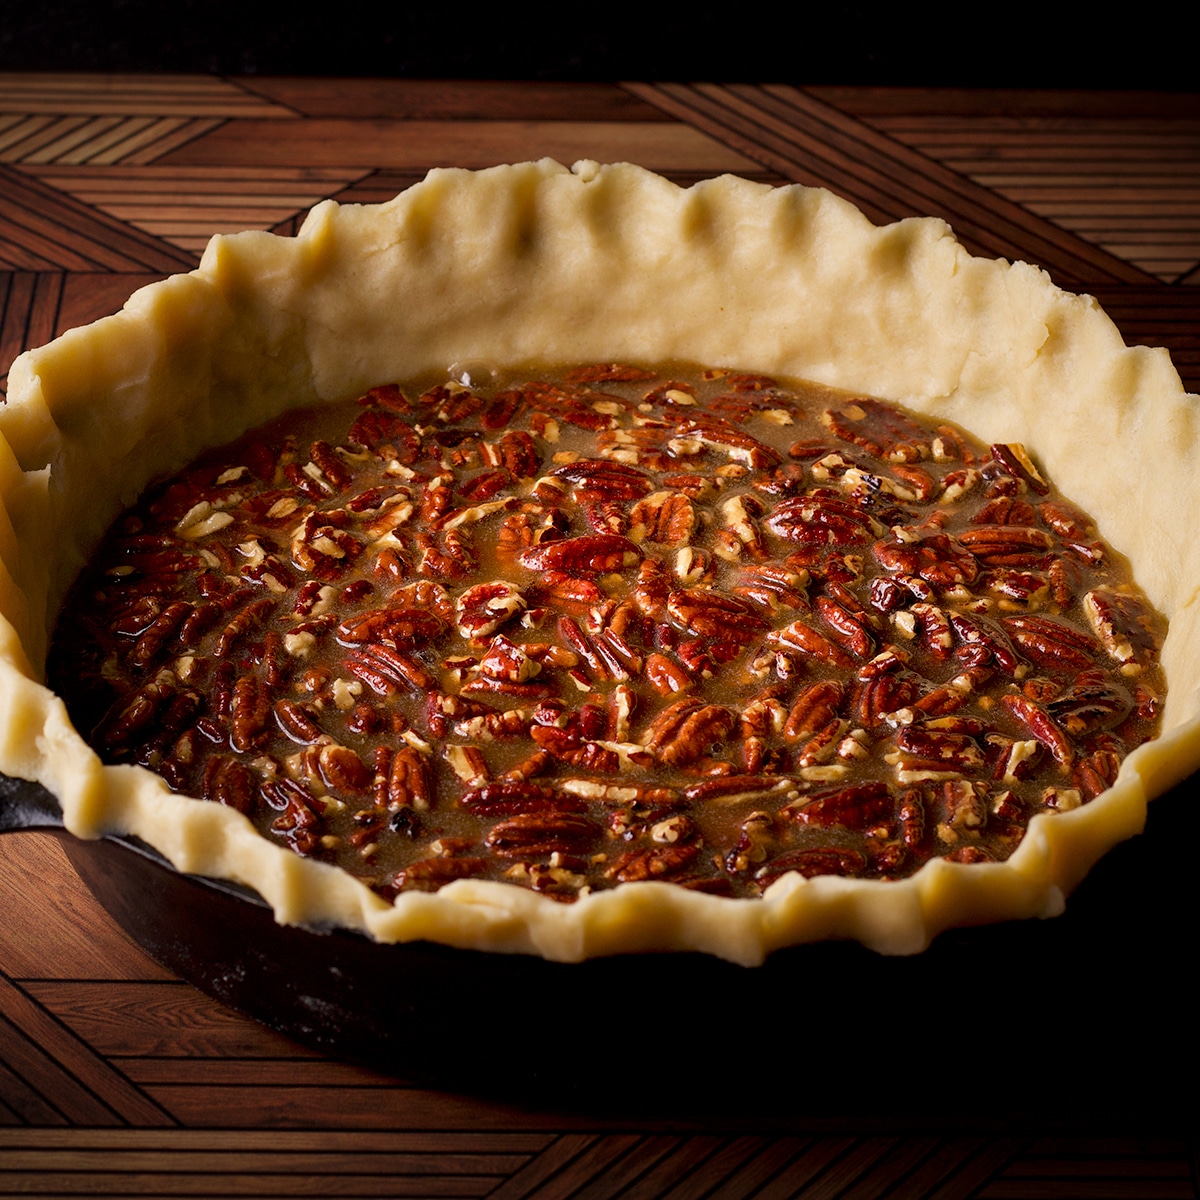 Pecan pie filling that's just been poured into a pie crust lined cast iron skillet.